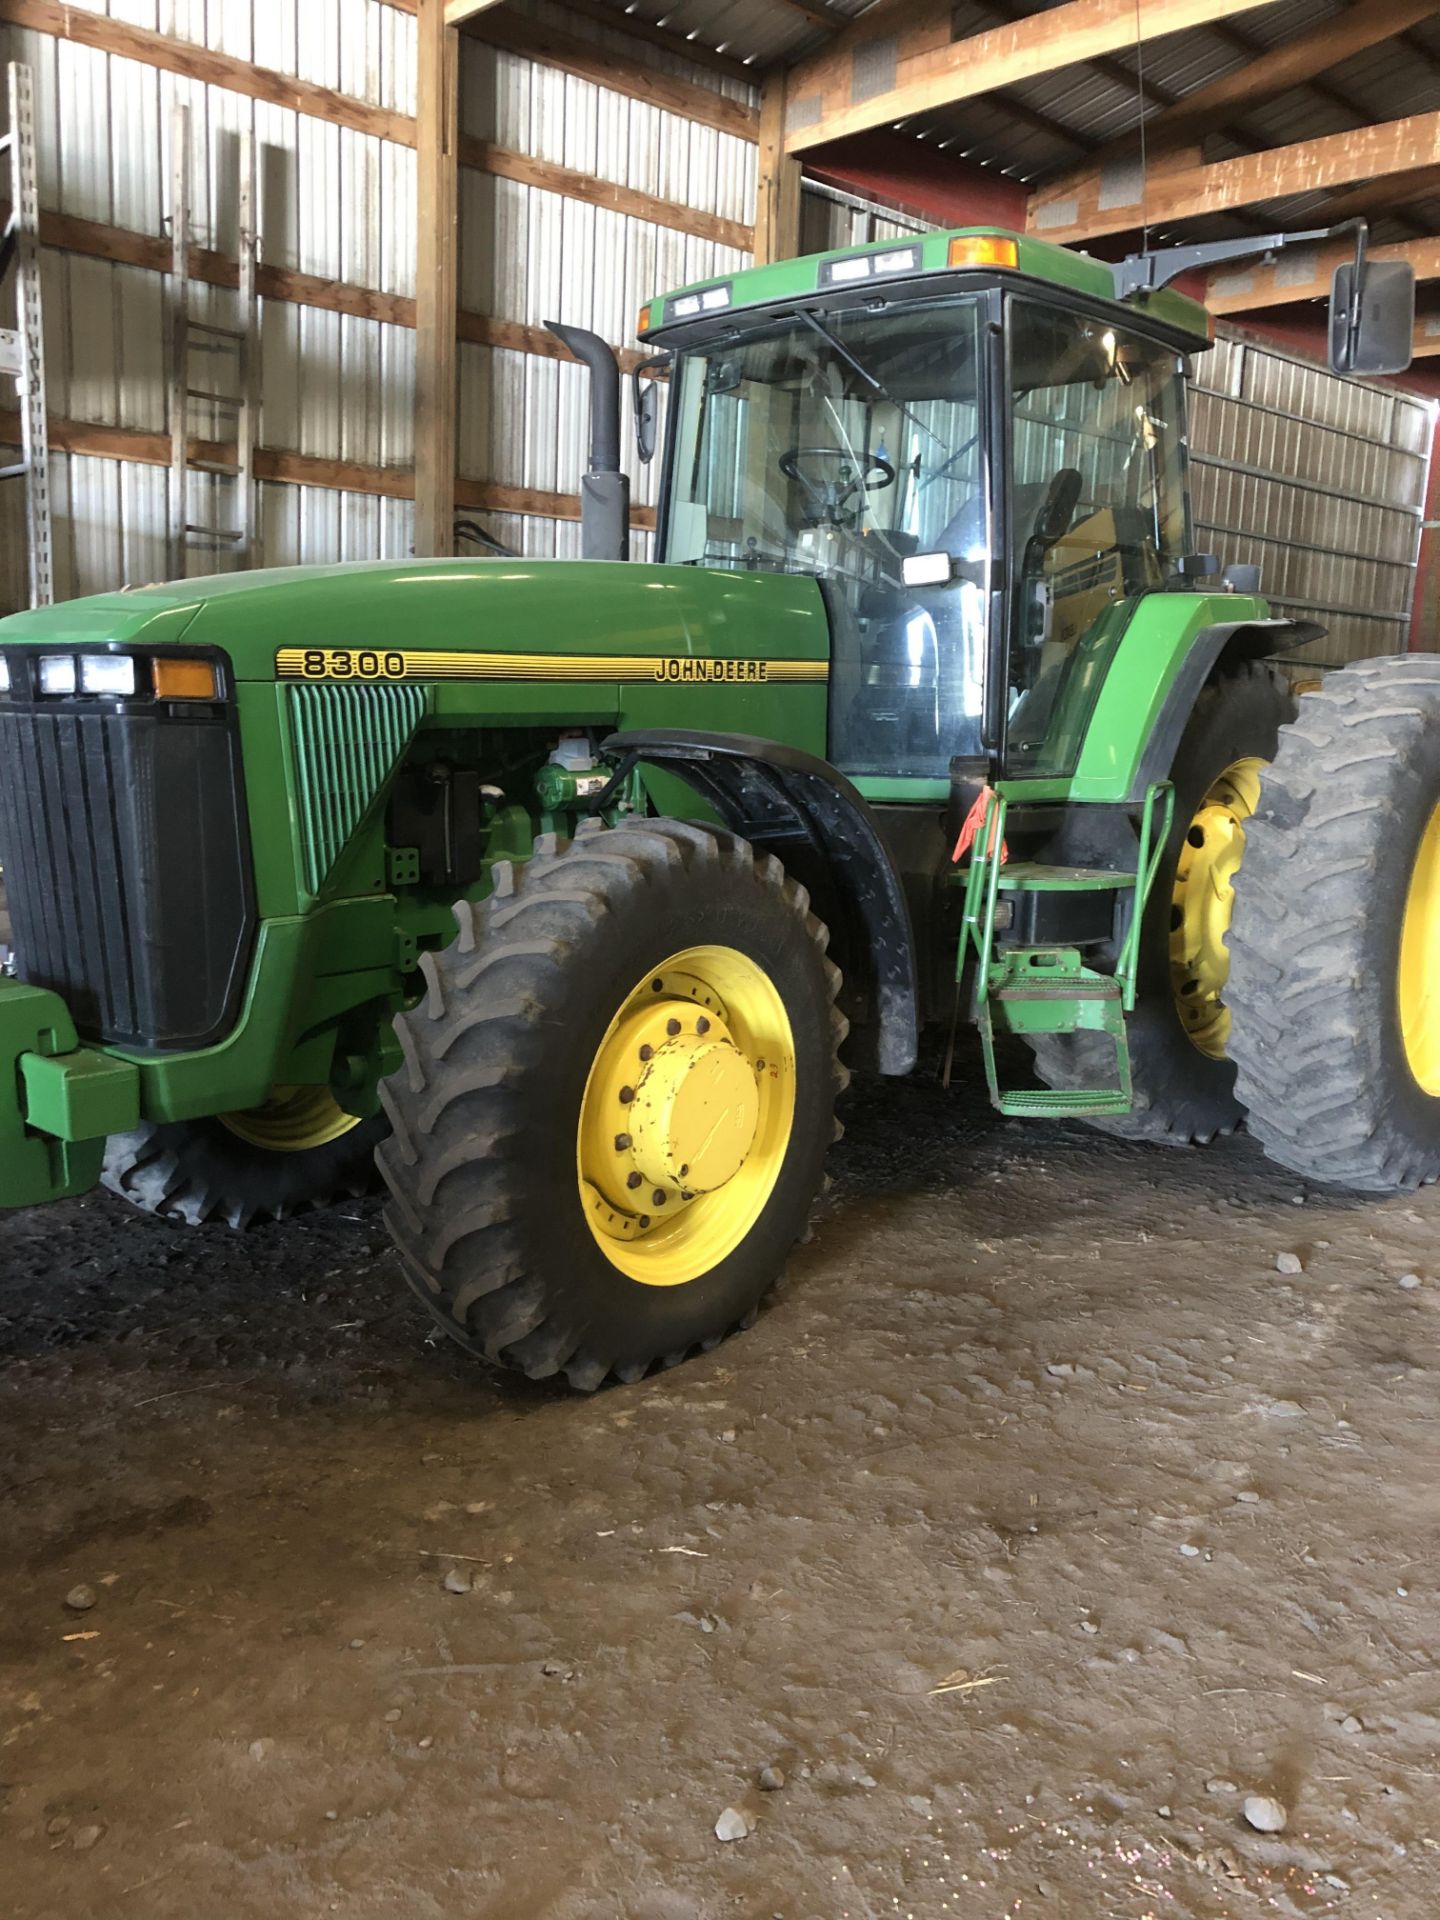 1995 JD 8300 MFWD, Power Shift, 4 Hyd. Remotes, 10 Front Weights, Serial #RW8300P003757, 10,051 - Image 4 of 5